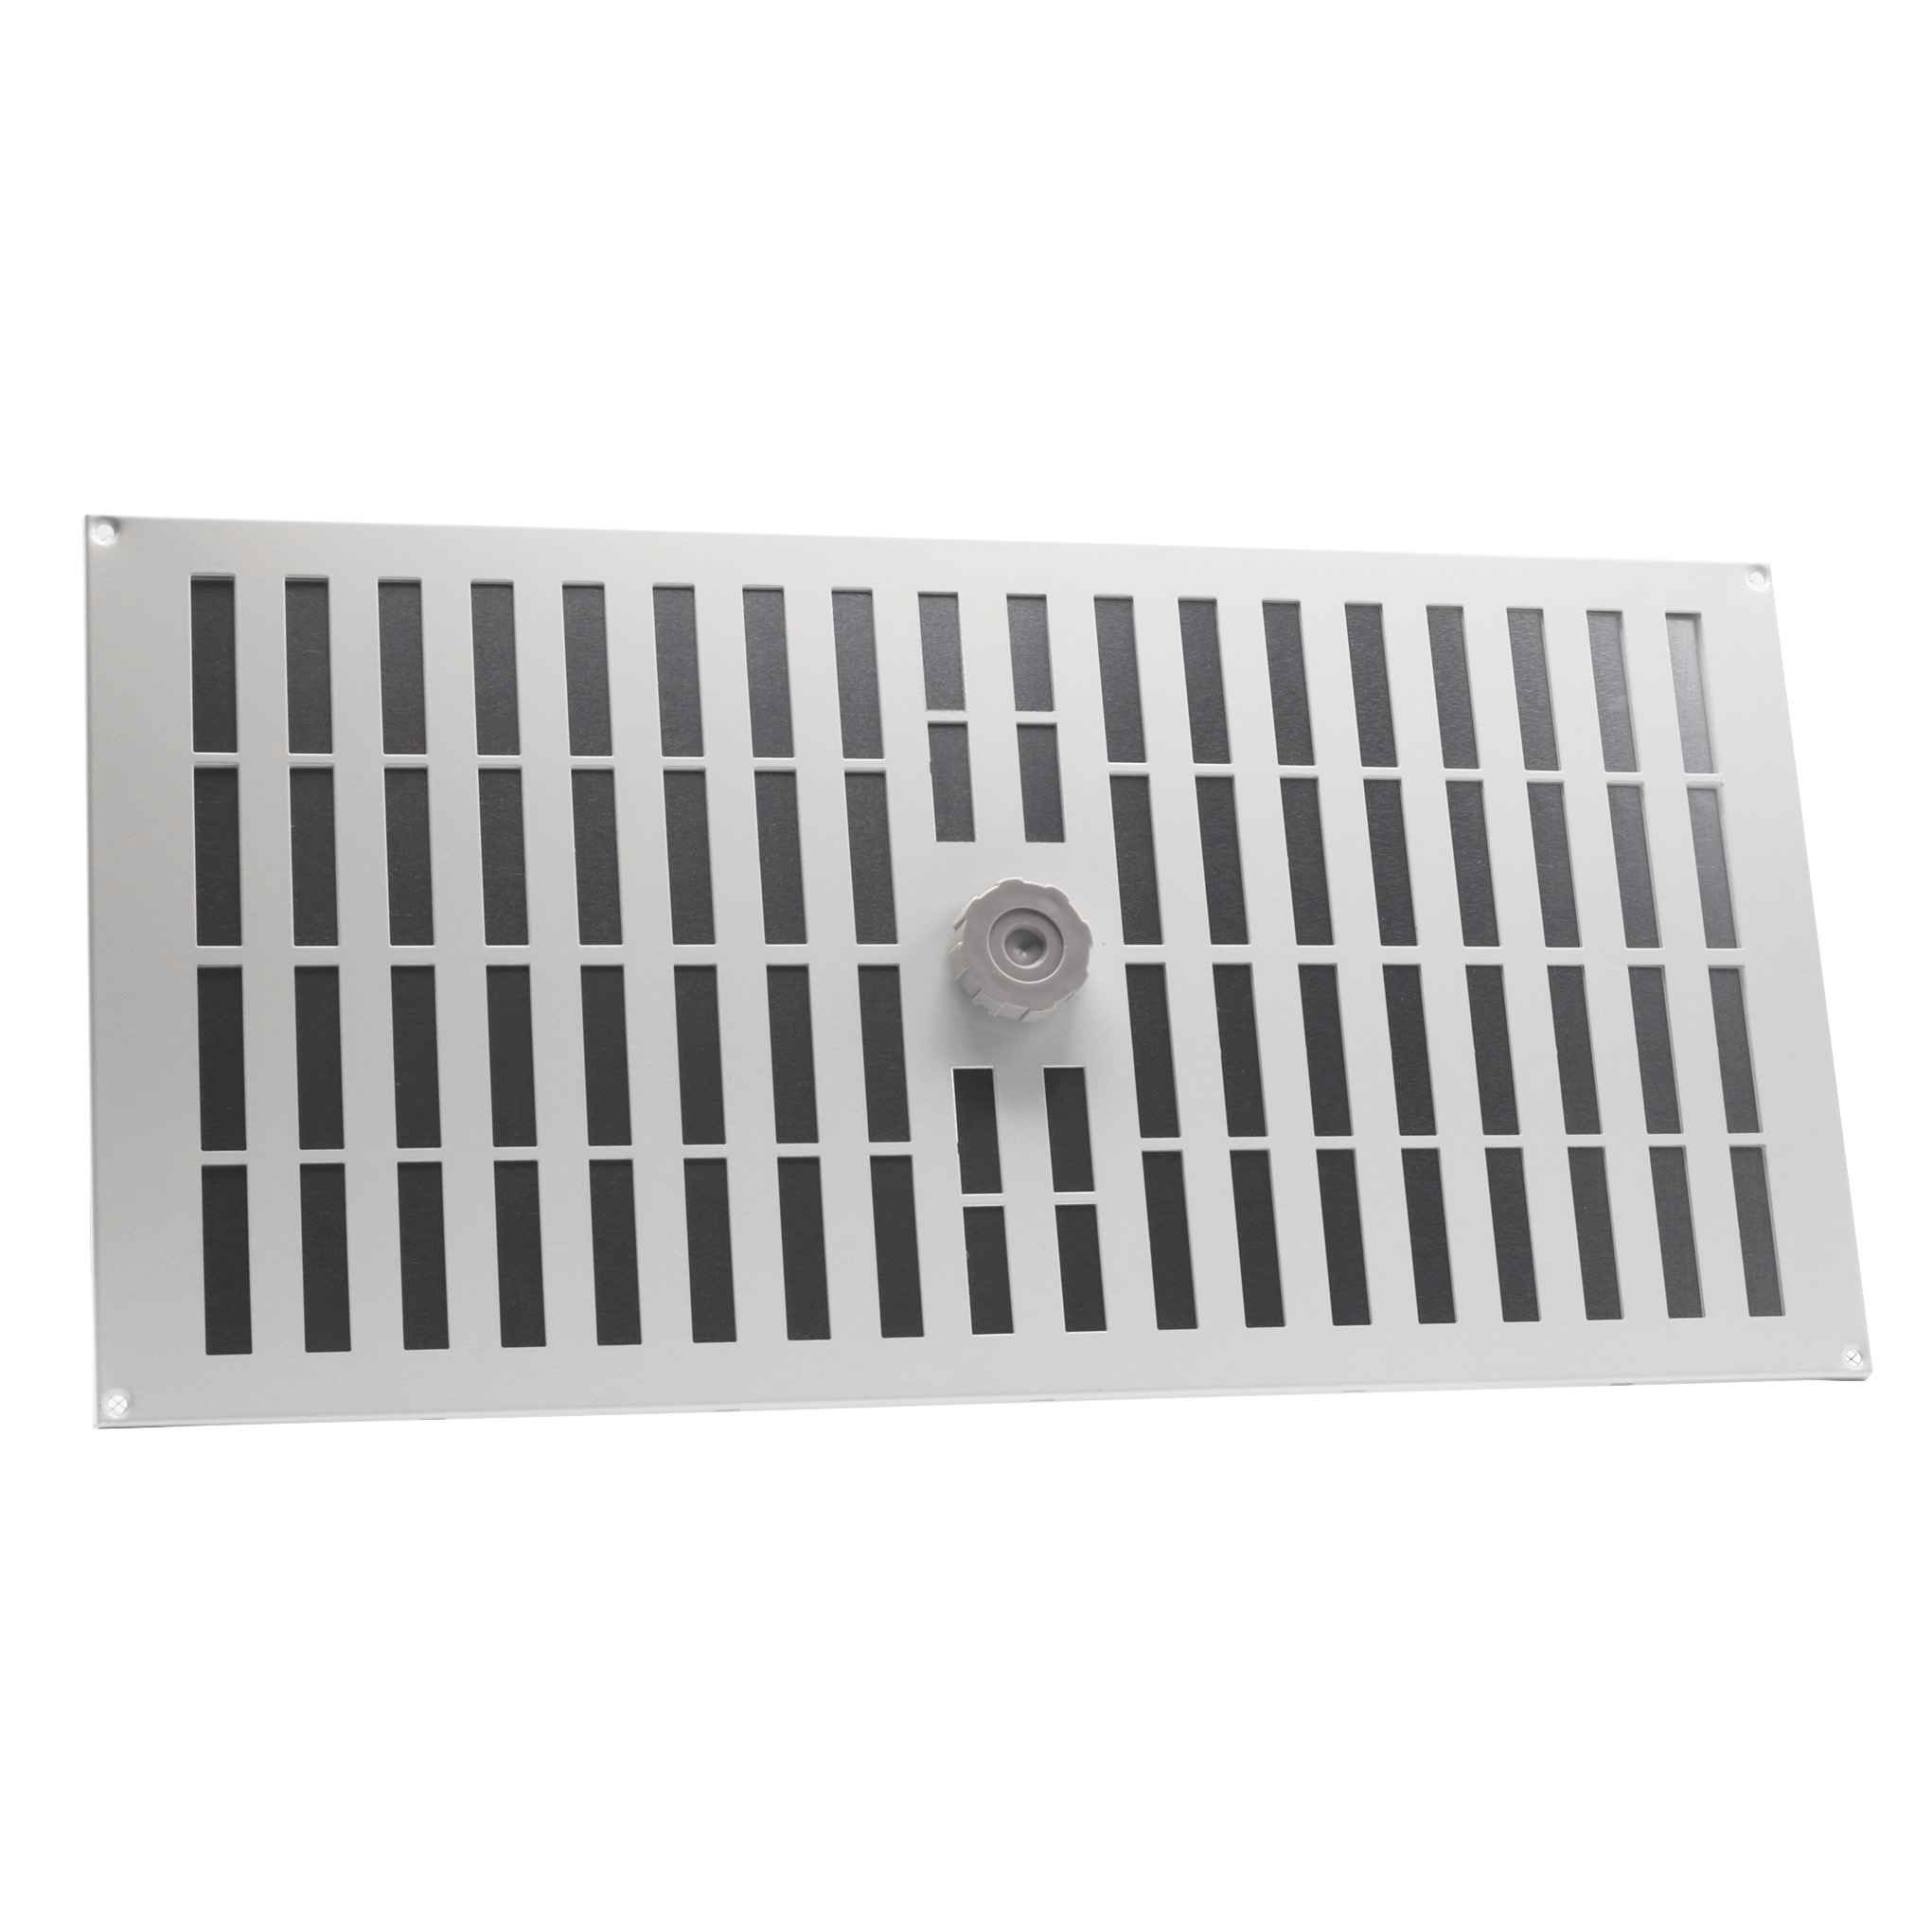 Alu shift grille 500x250mm White (RAL9010)